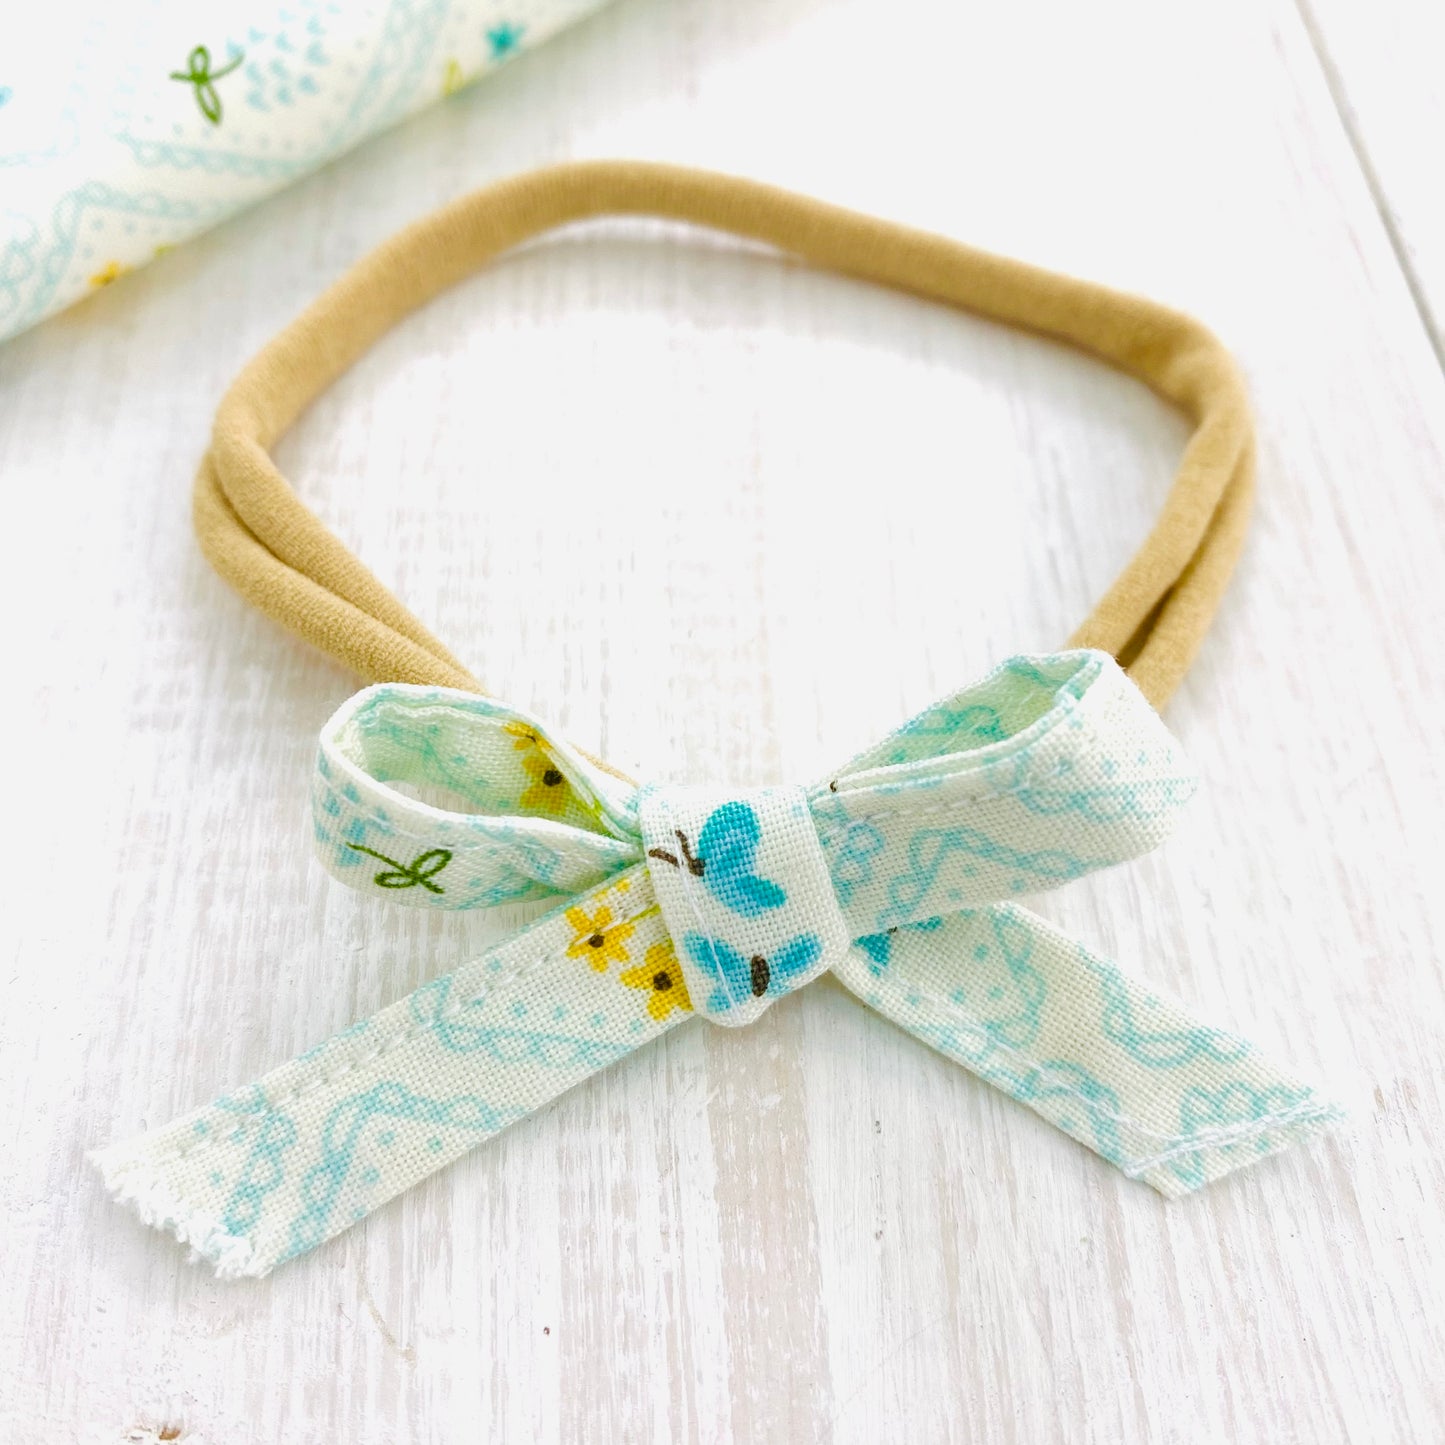 Hand tied baby bow headband in blue floral with butterfly.